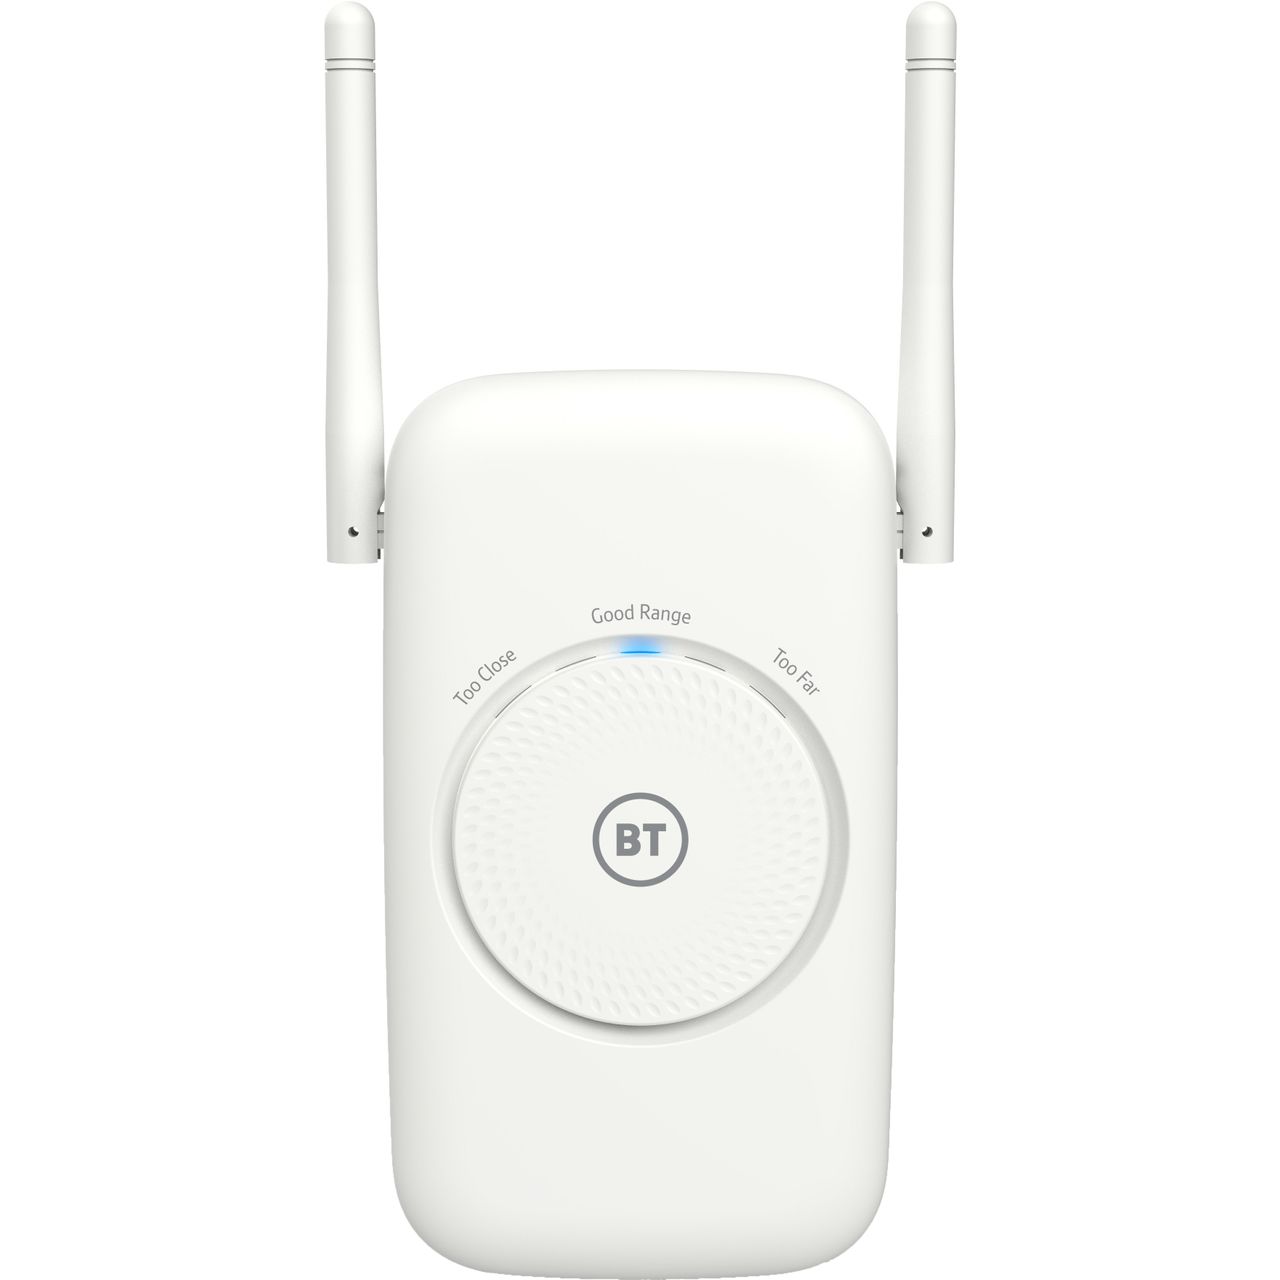 BT Dual Band AC2600 Gaming WiFi Range Extender Review